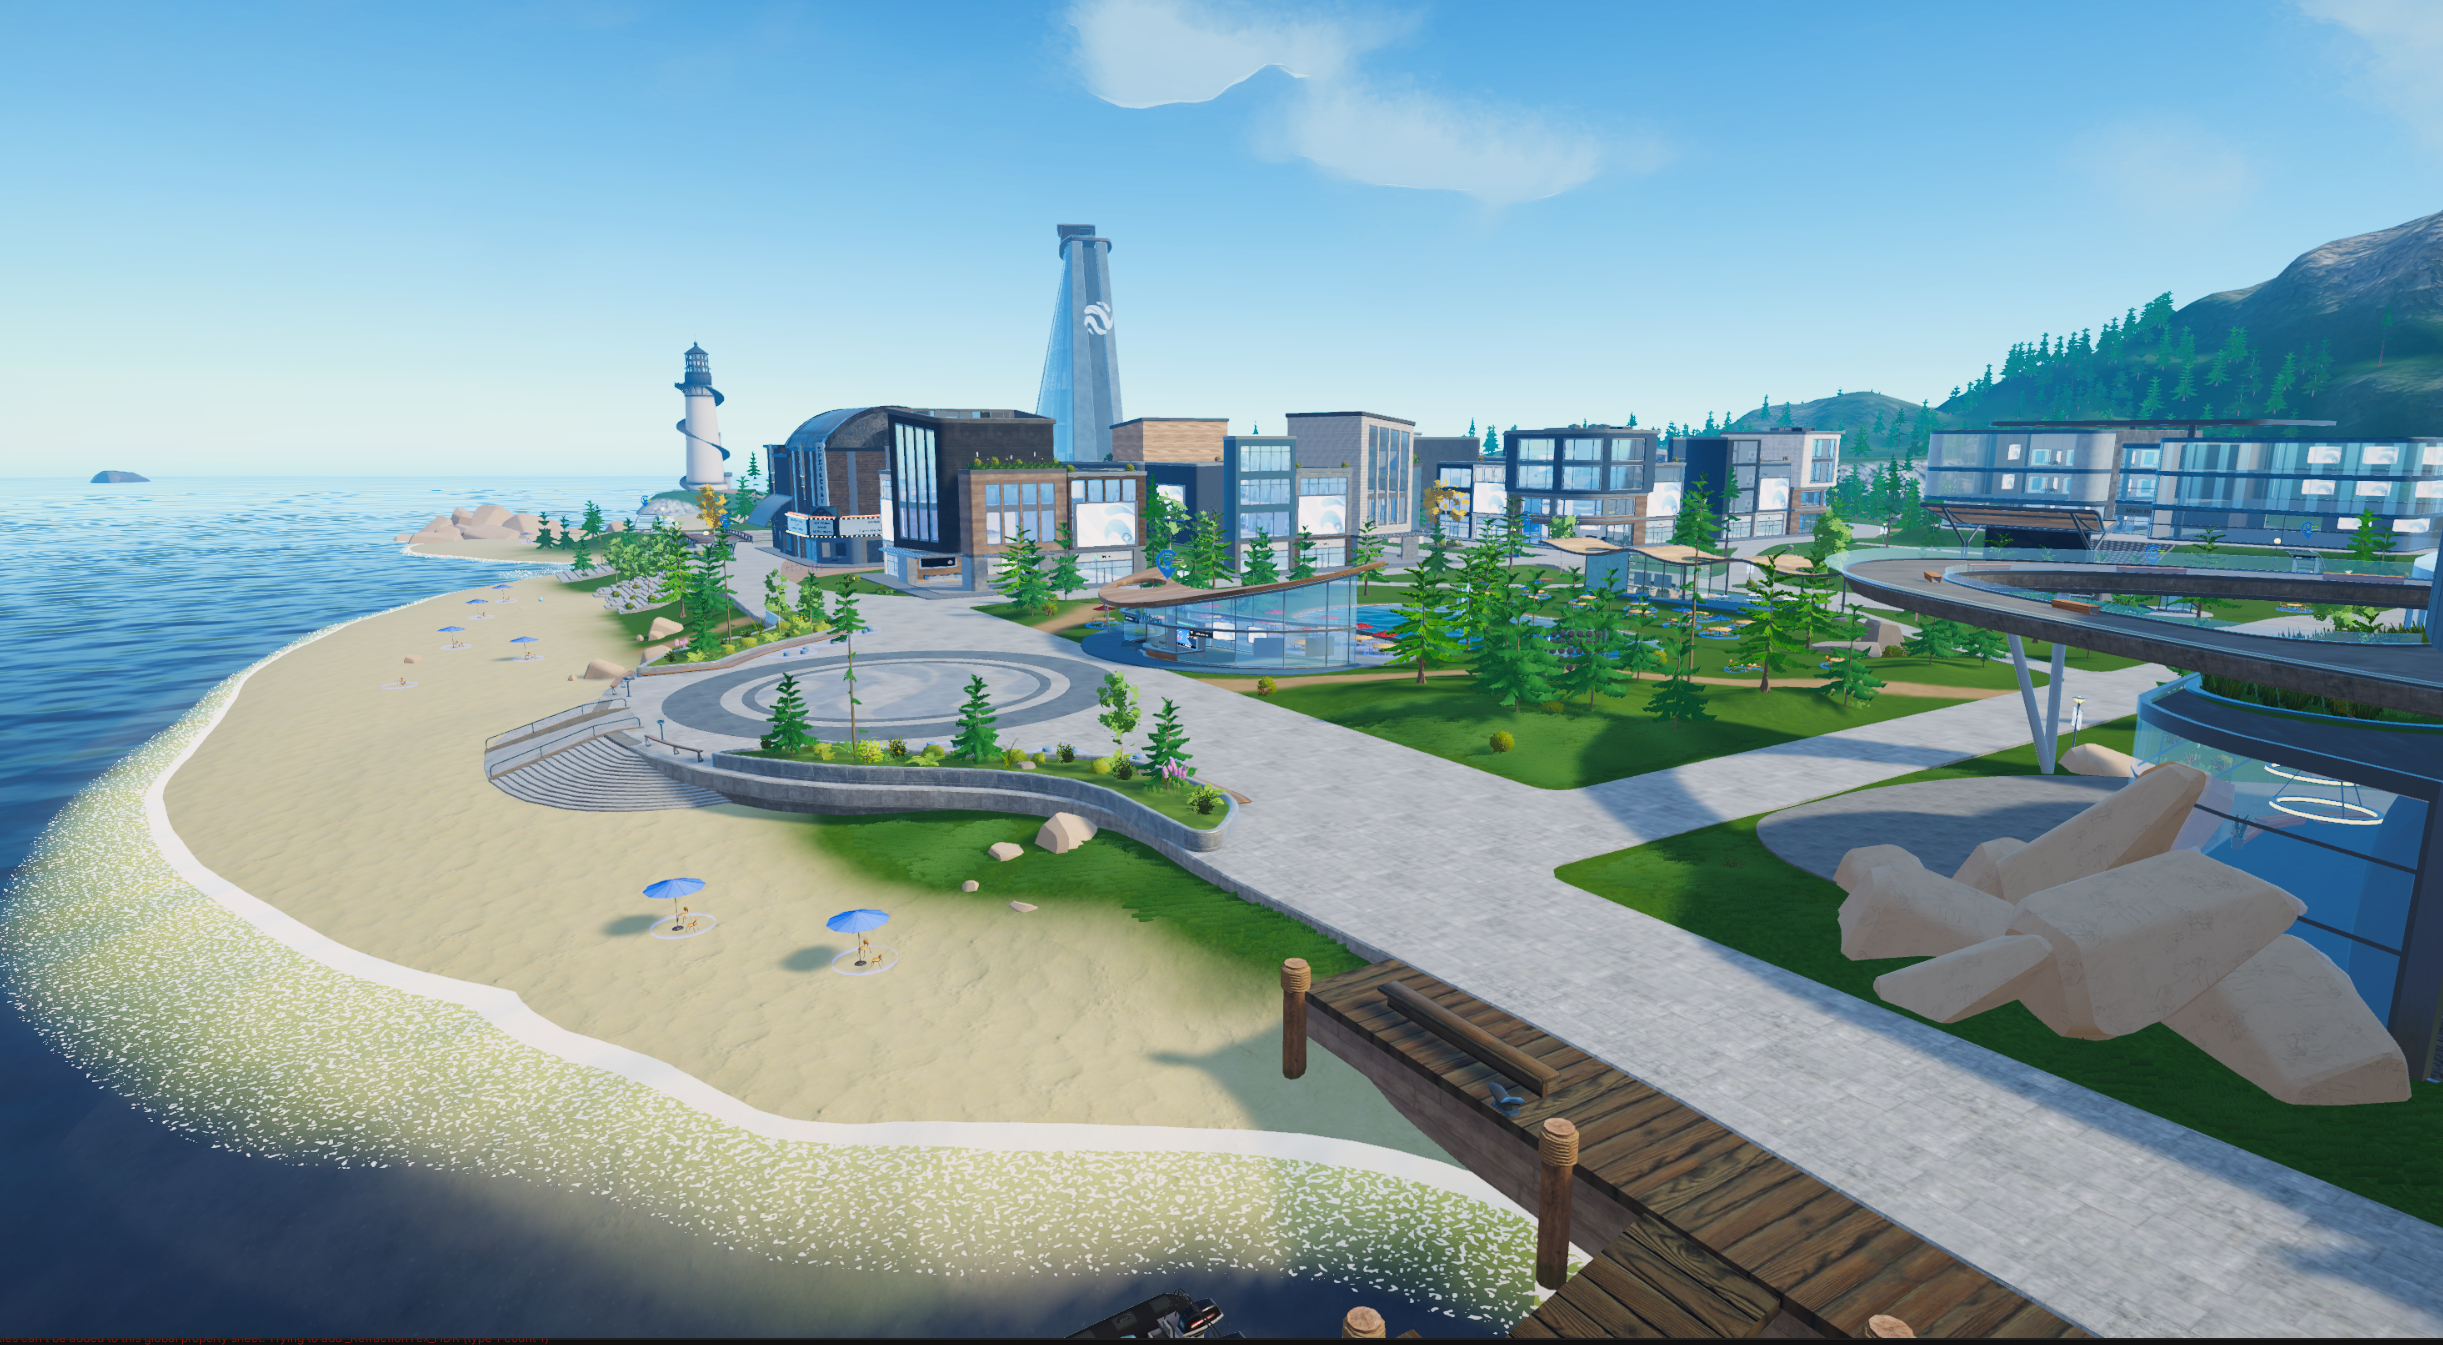 Another view of Virbela's newly designed virtual campus